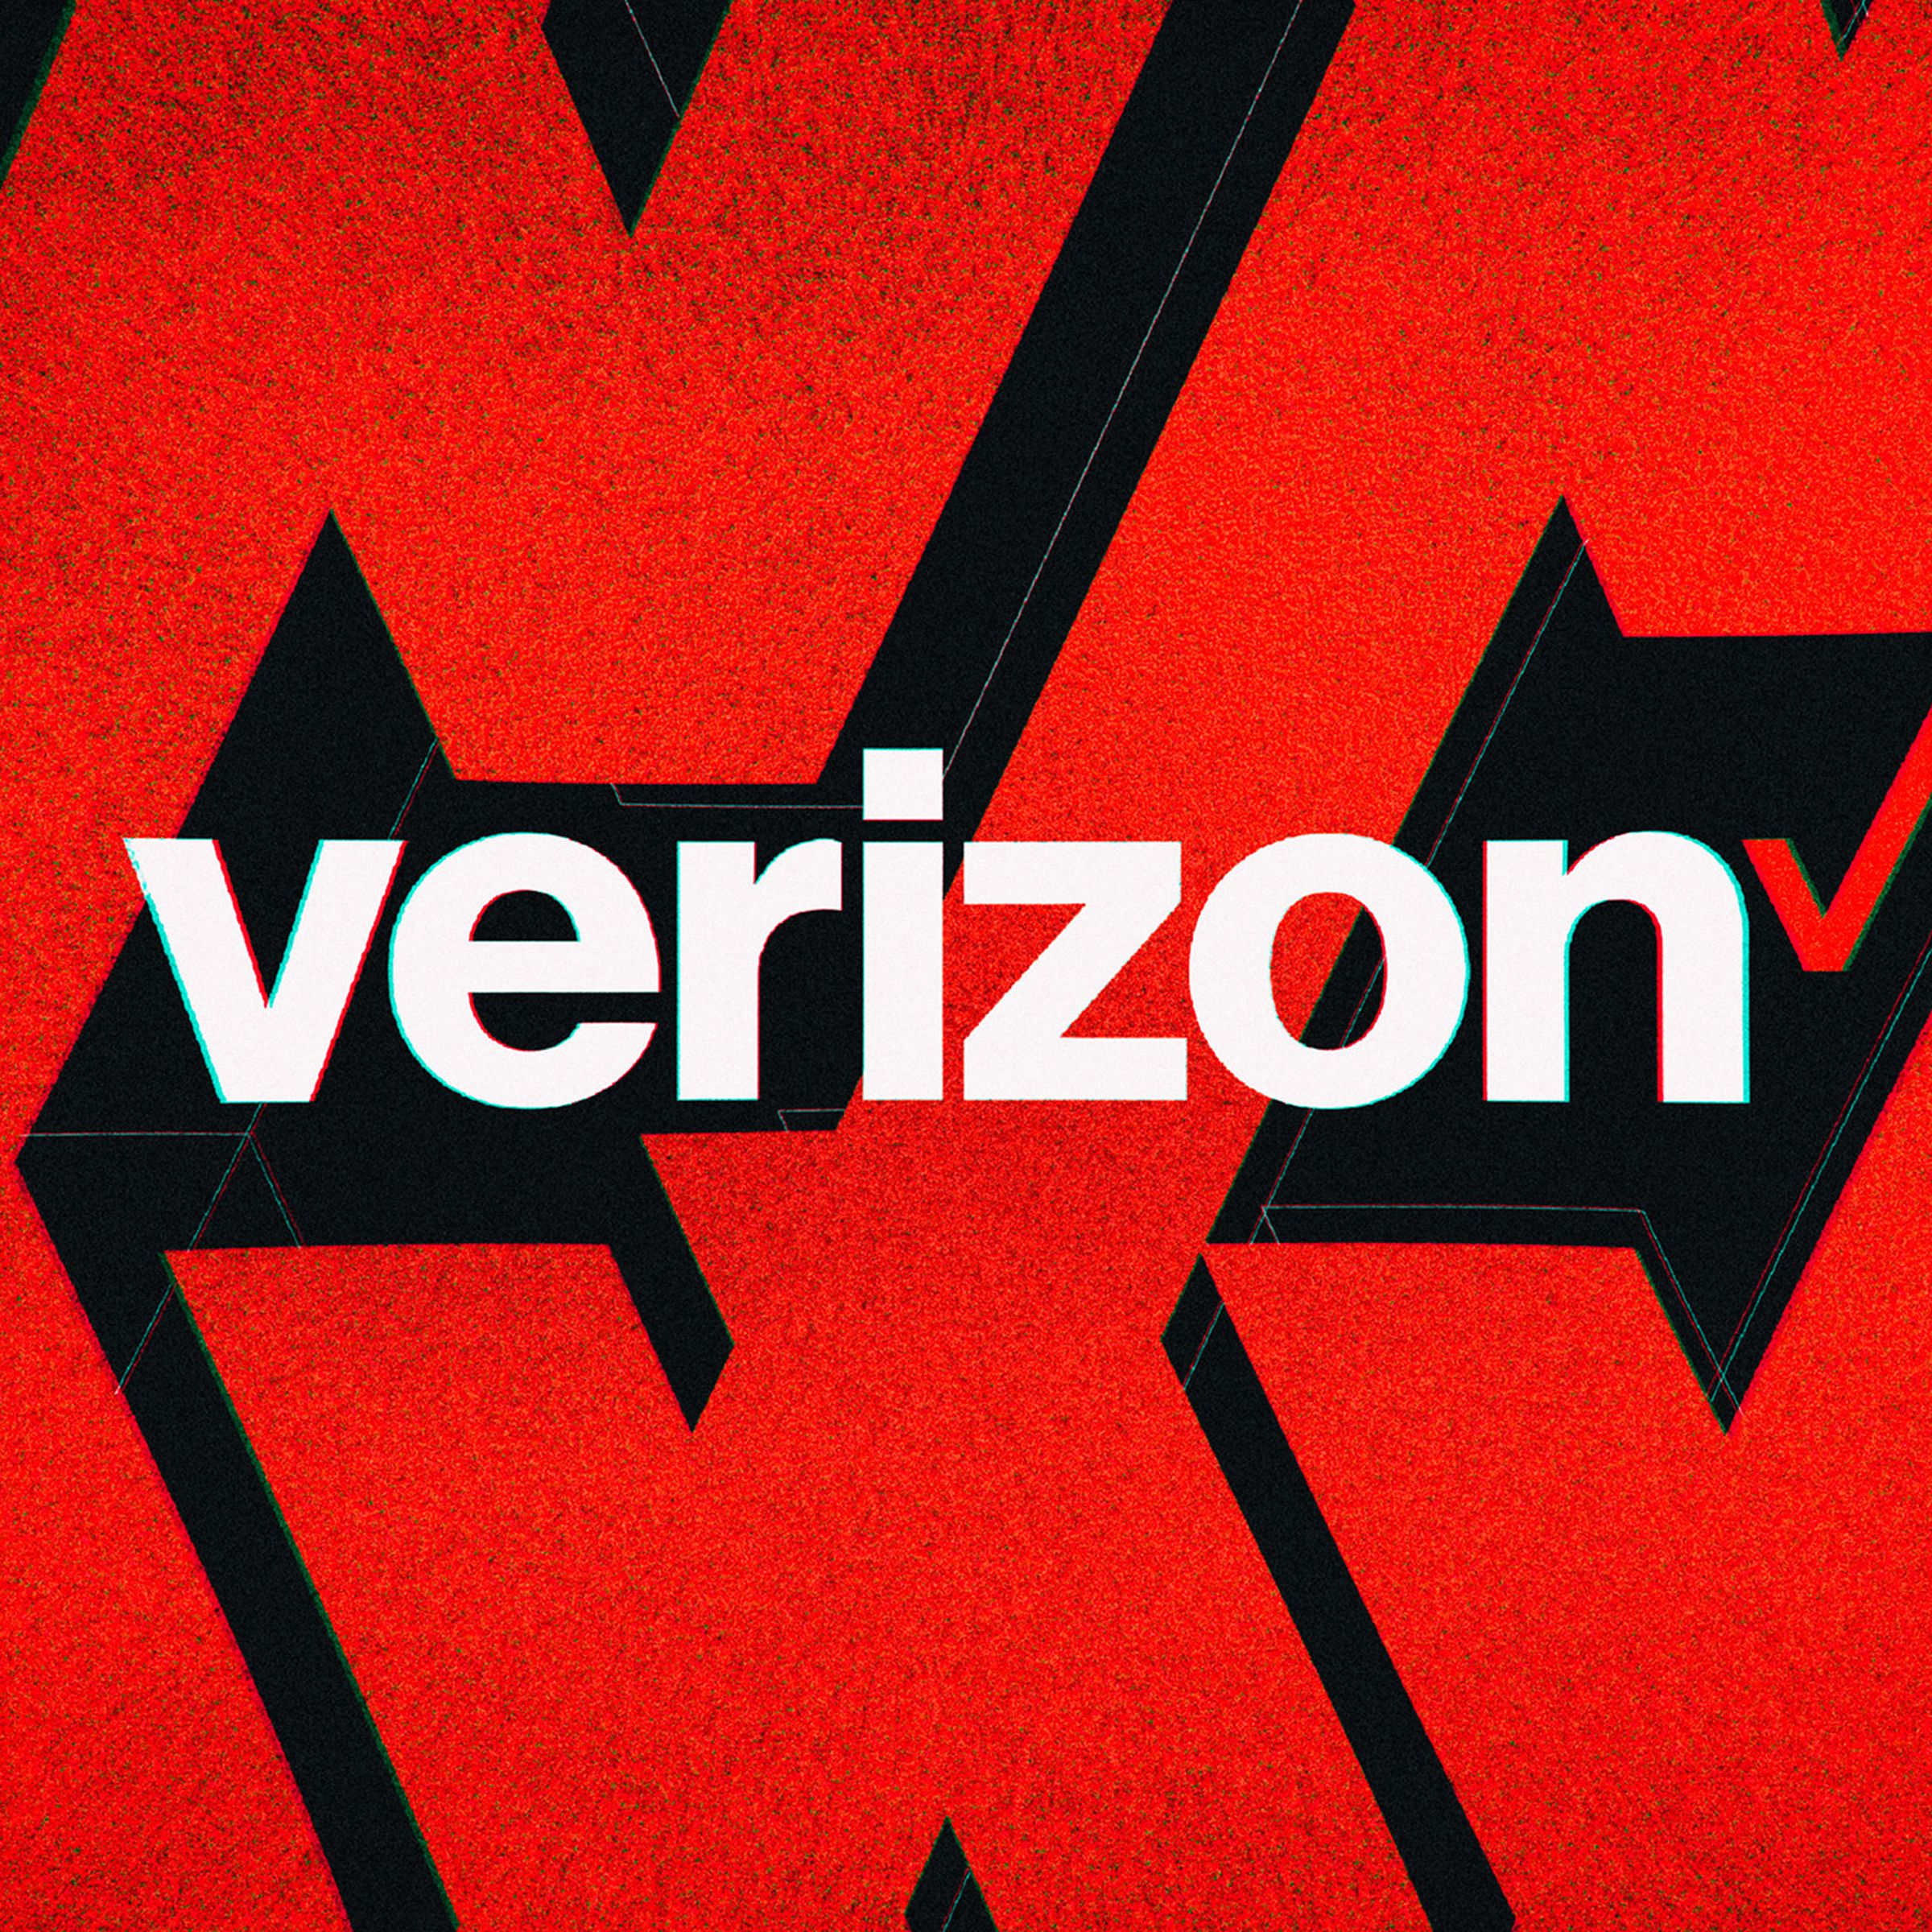 A picture of the Verizon name logo with an overlapping pattern of the red checkmark logo in the background.